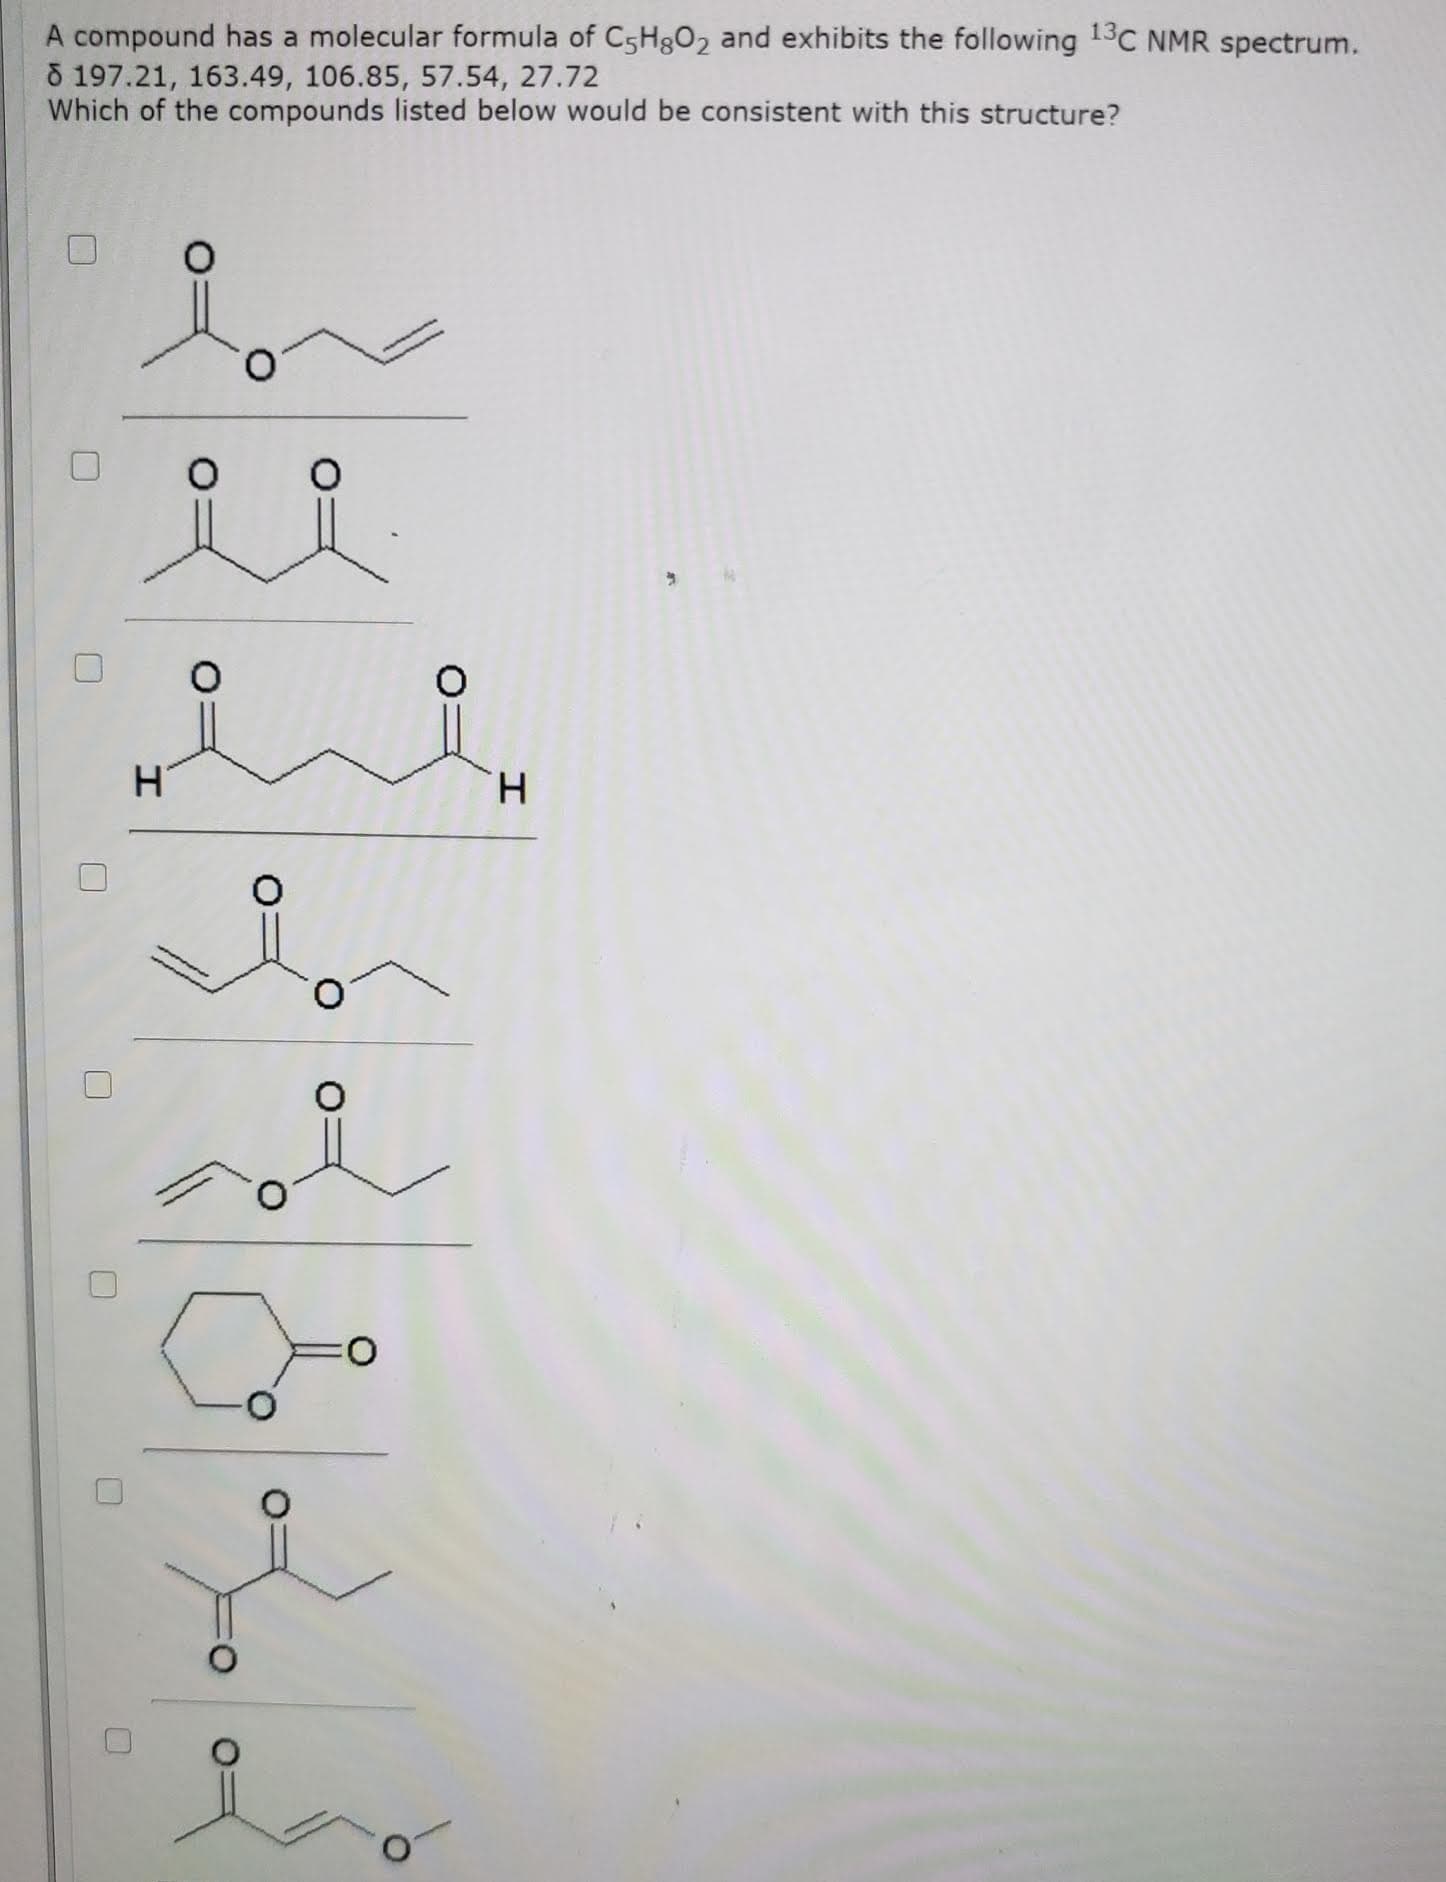 A compound has a molecular formula of C5H8O2 and exhibits the following 13C NMR spectrum.
õ 197.21, 163.49, 106.85, 57.54, 27.72
Which of the compounds listed below would be consistent with this structure?
H.
